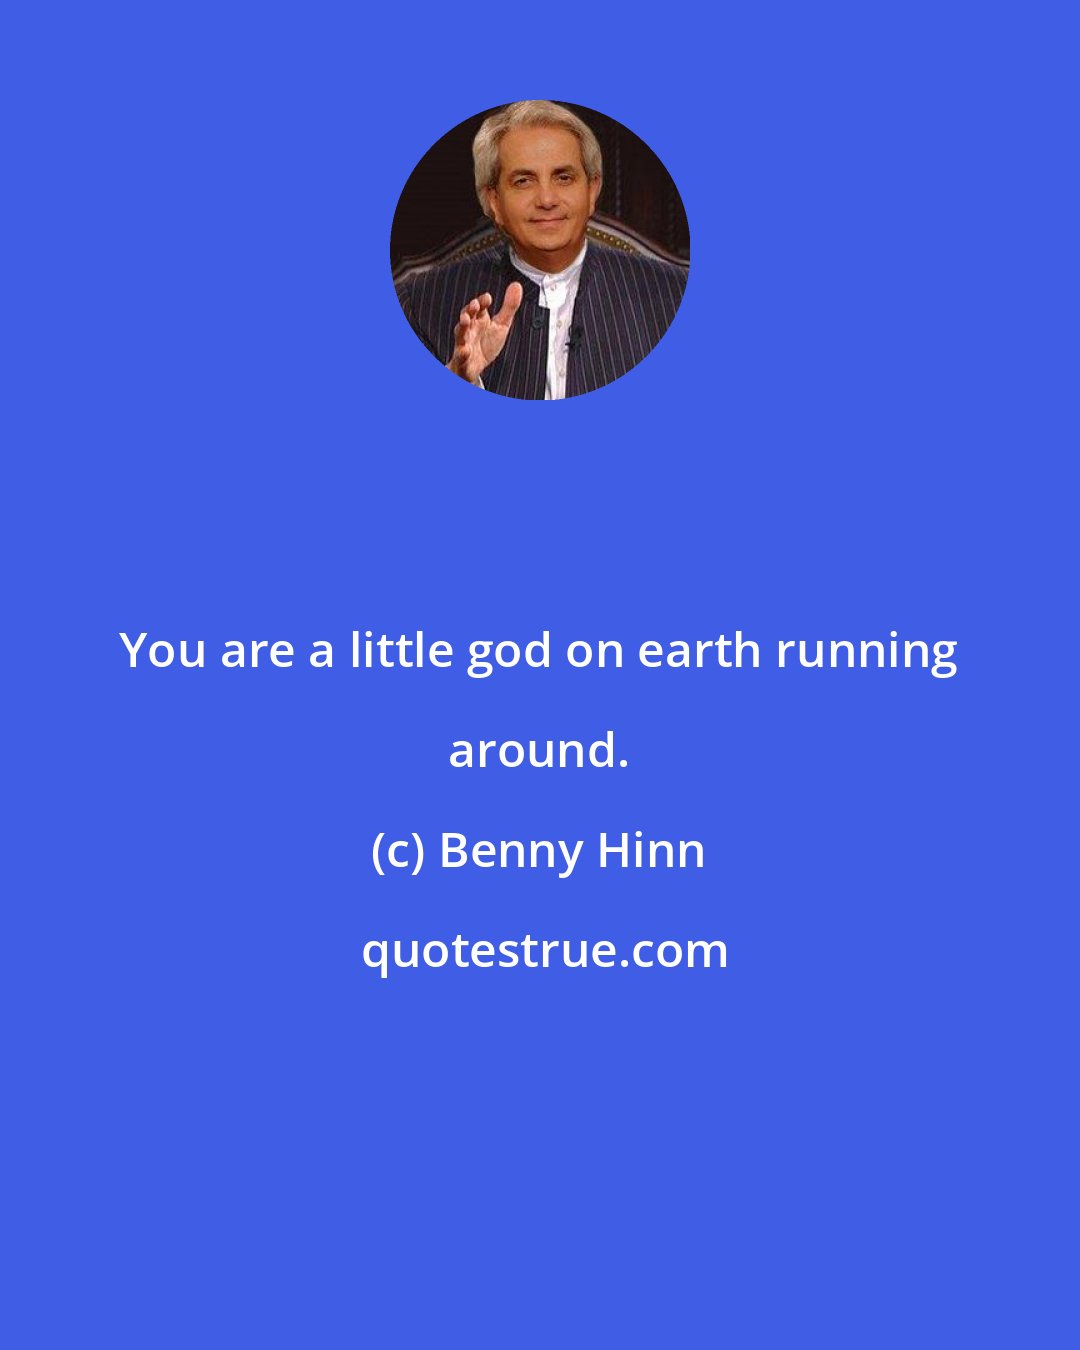 Benny Hinn: You are a little god on earth running around.